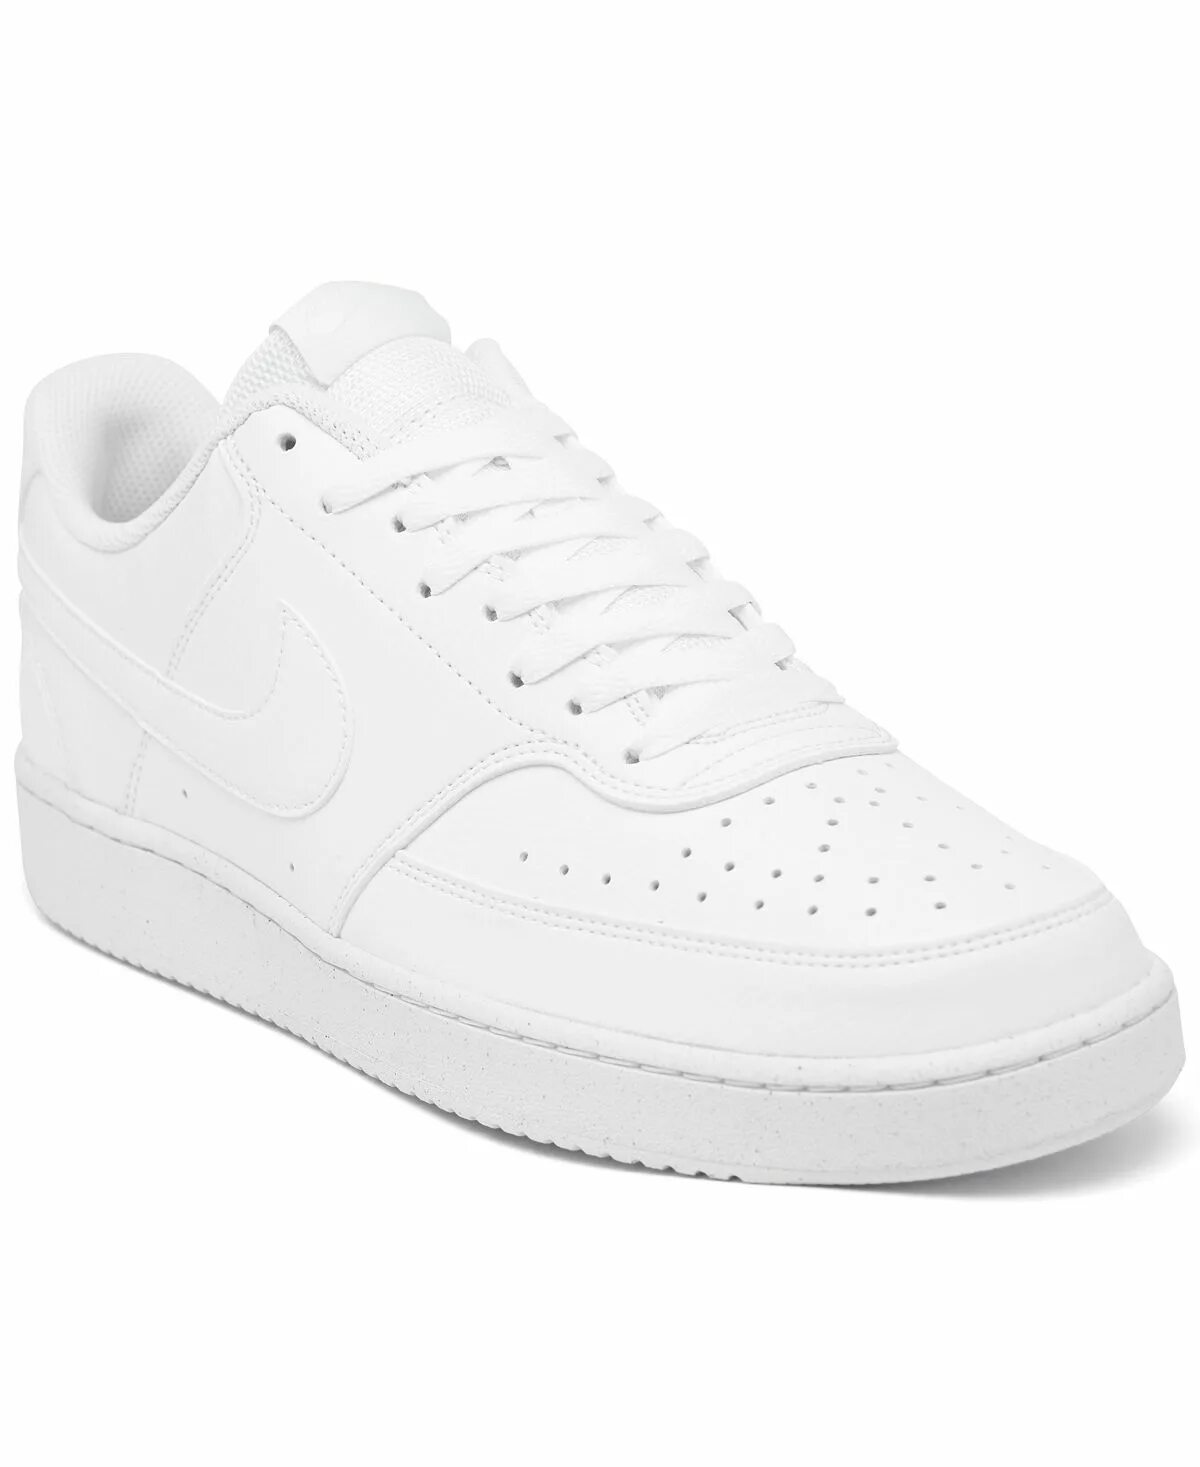 Nike court vision low next nature. Nike Court Vision Low белый бежевый. Women's NIKECOURT Vision Low Casual Sneakers from finish line. Men's Court Vision Mid next nature Casual Sneakers from finish line.